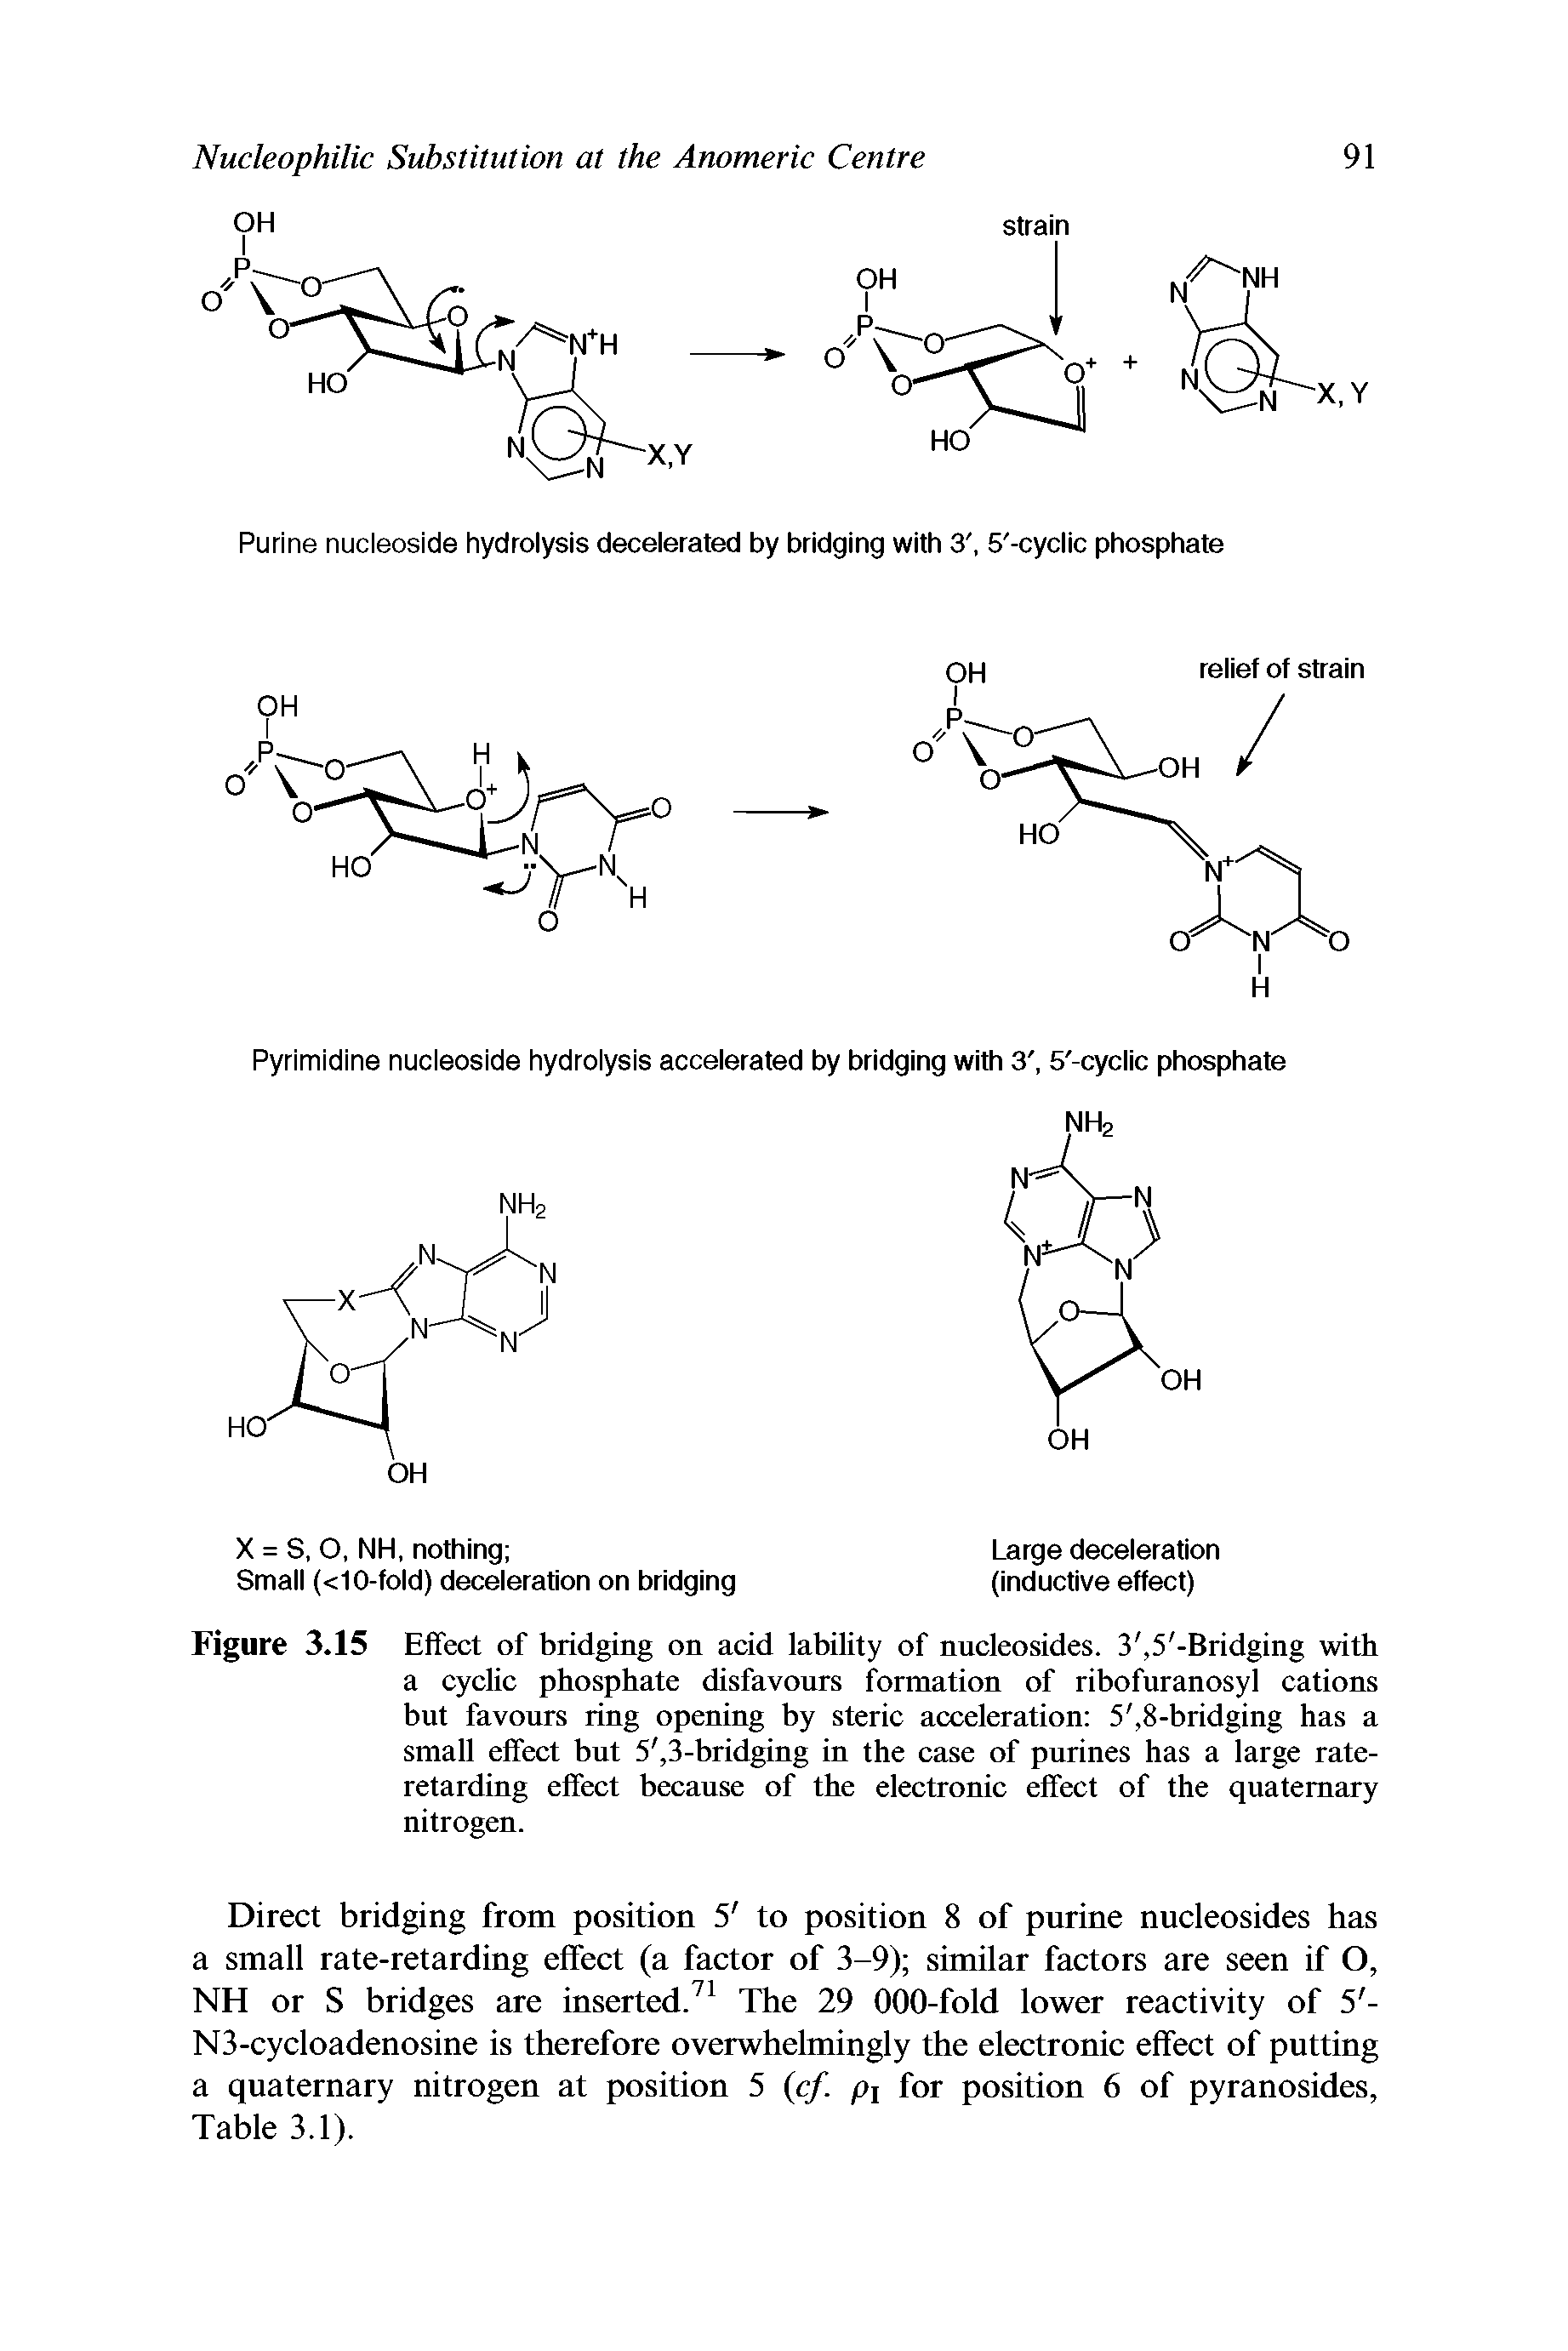 Figure 3.15 Effect of bridging on acid lability of nucleosides. 3, 5 -Bridging with a cyclic phosphate disfavours formation of ribofuranosyl cations but favours ring opening by steric acceleration 5, 8-bridging has a small effect but 5, 3-bridging in the case of purines has a large rate-retarding effect because of the electronic effect of the quaternary nitrogen.